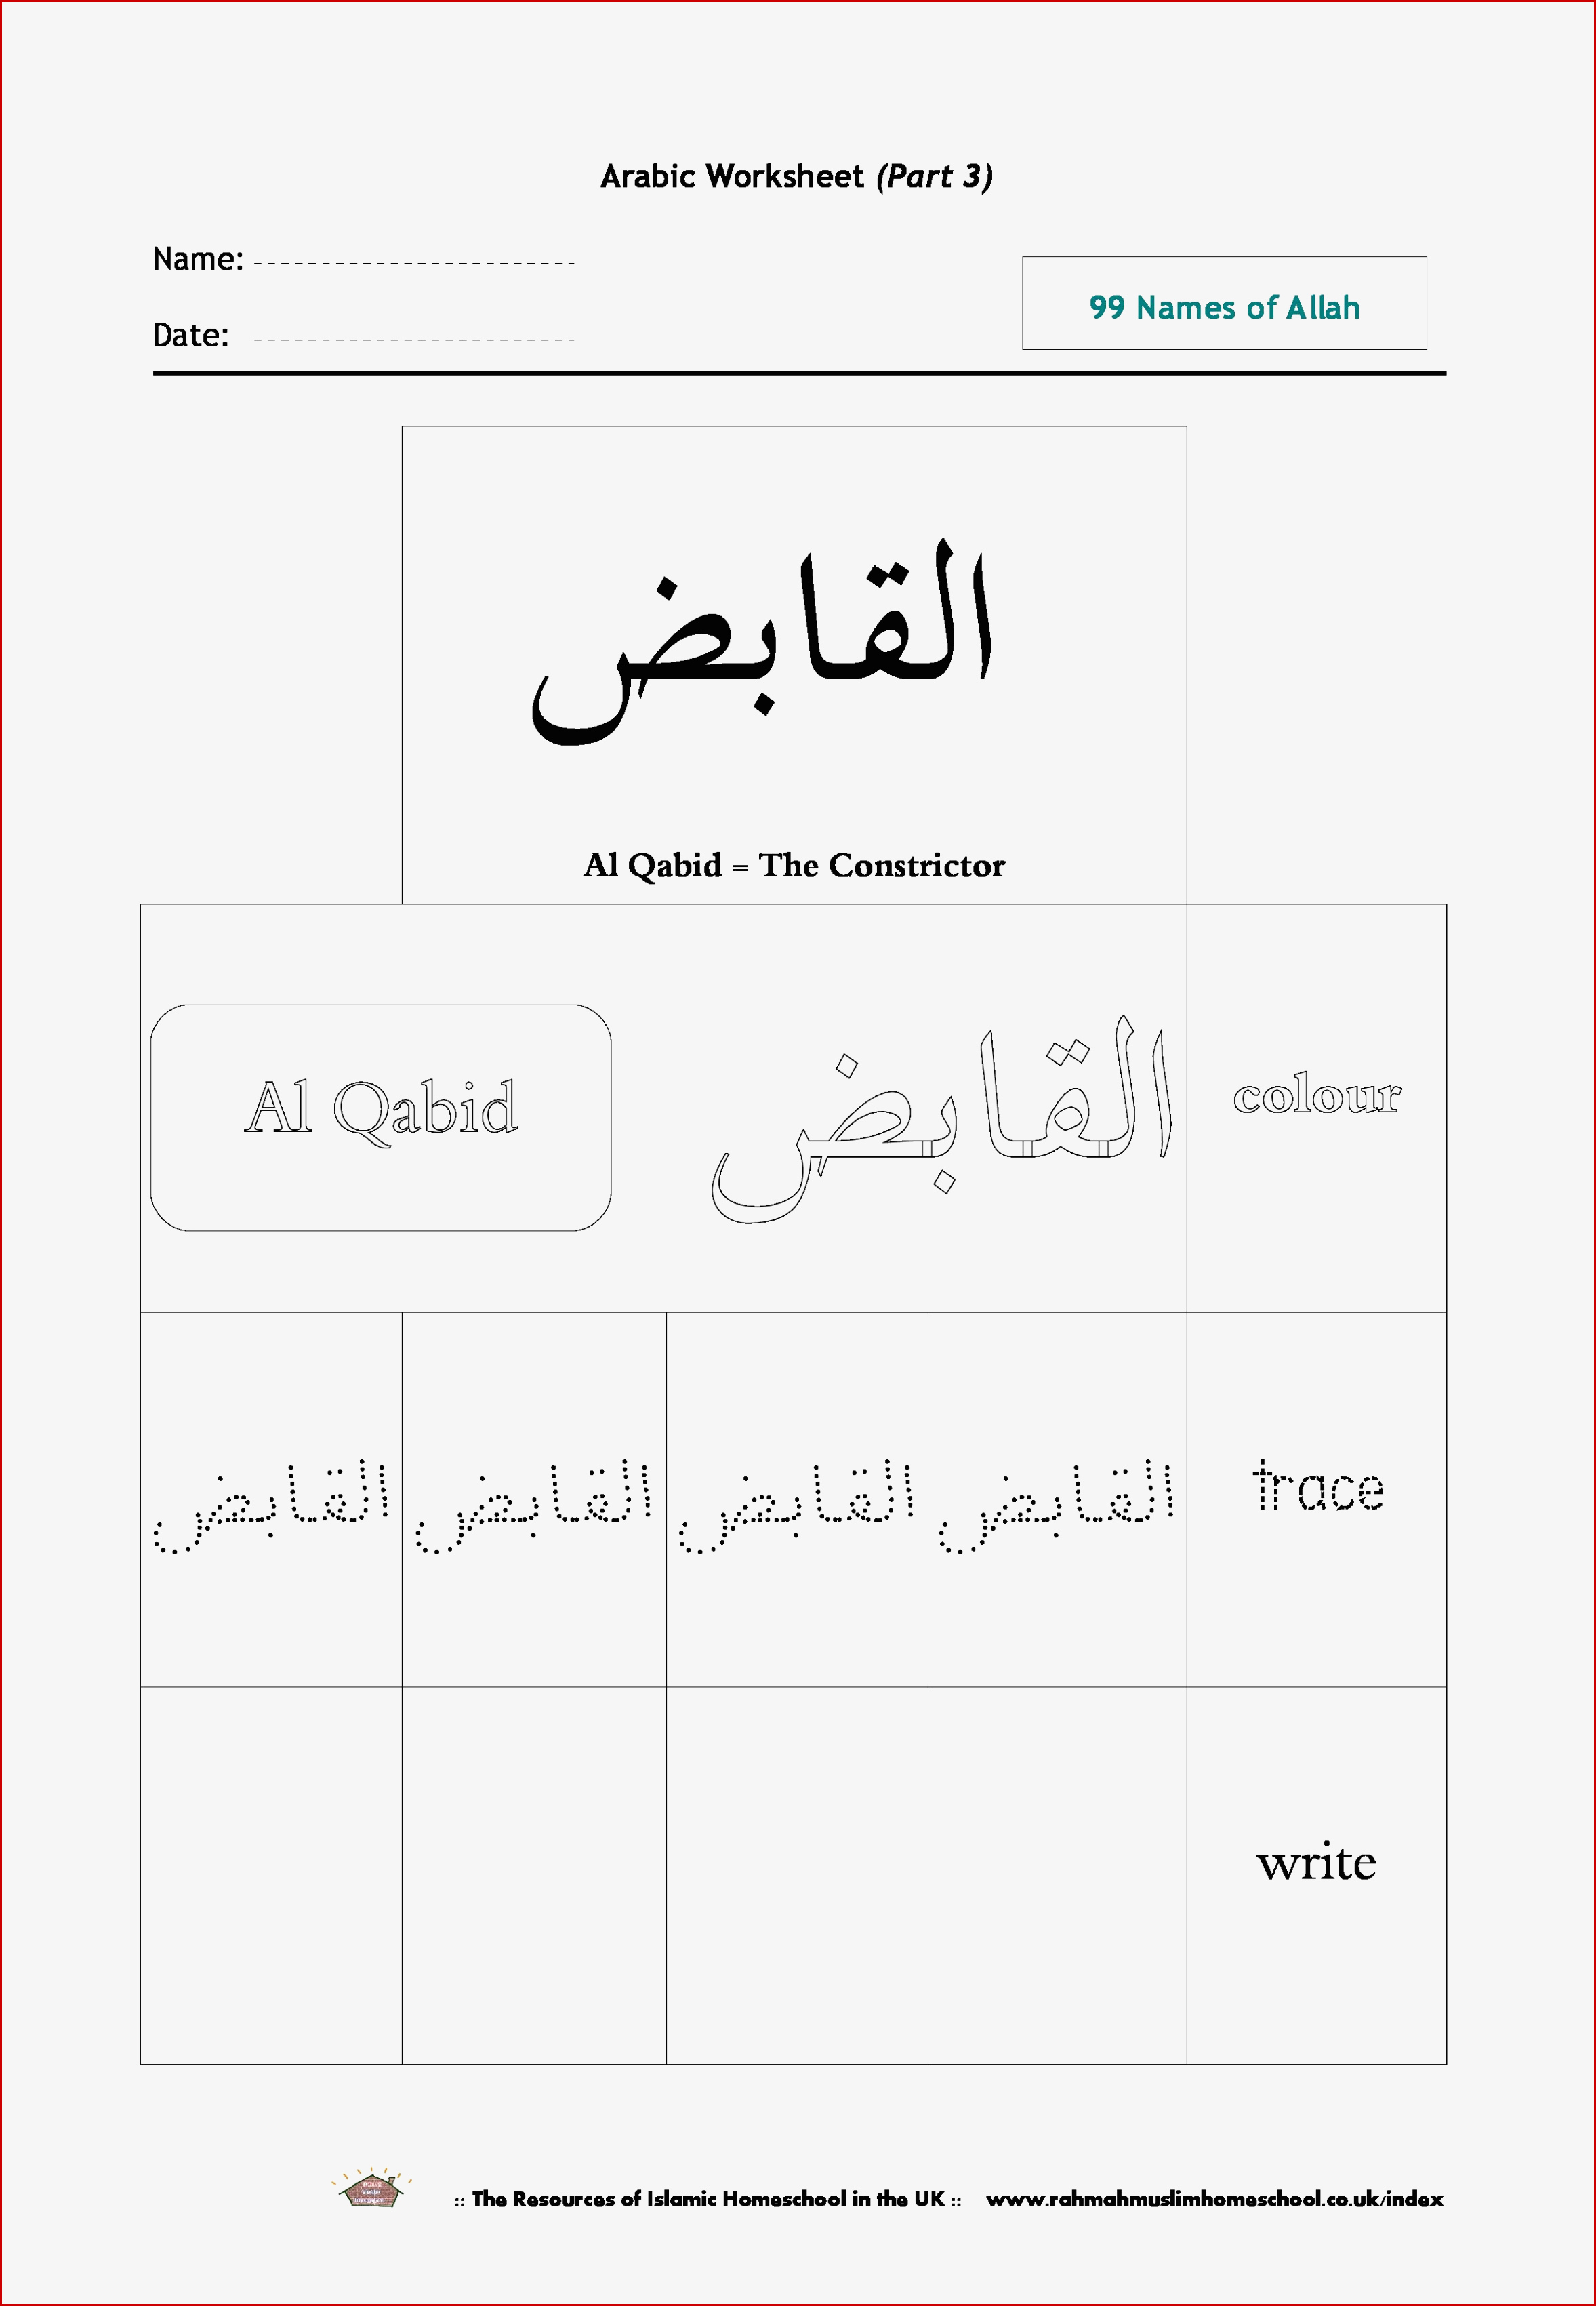 Free Worksheets Part 3 Of the 99 Names Of Allah 9 Pages